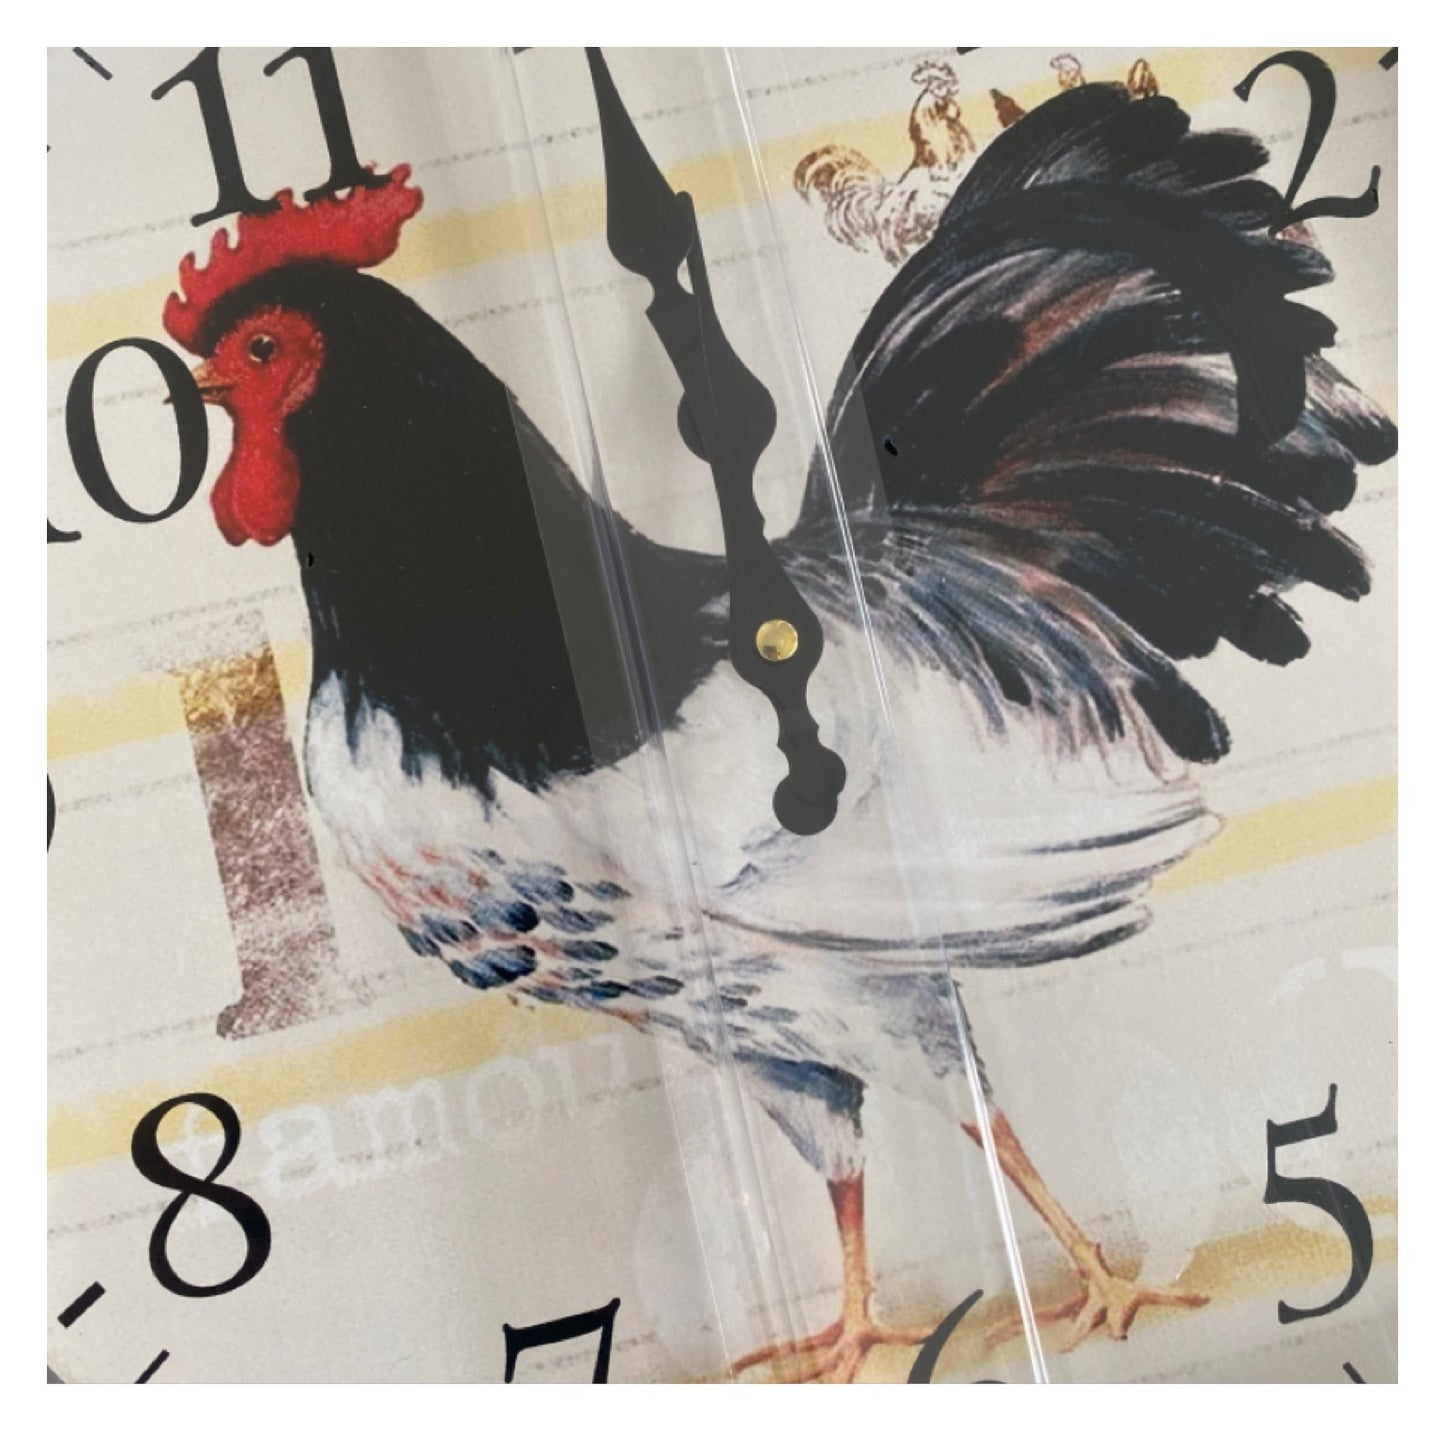 Clock Wall Rooster Country 34cm